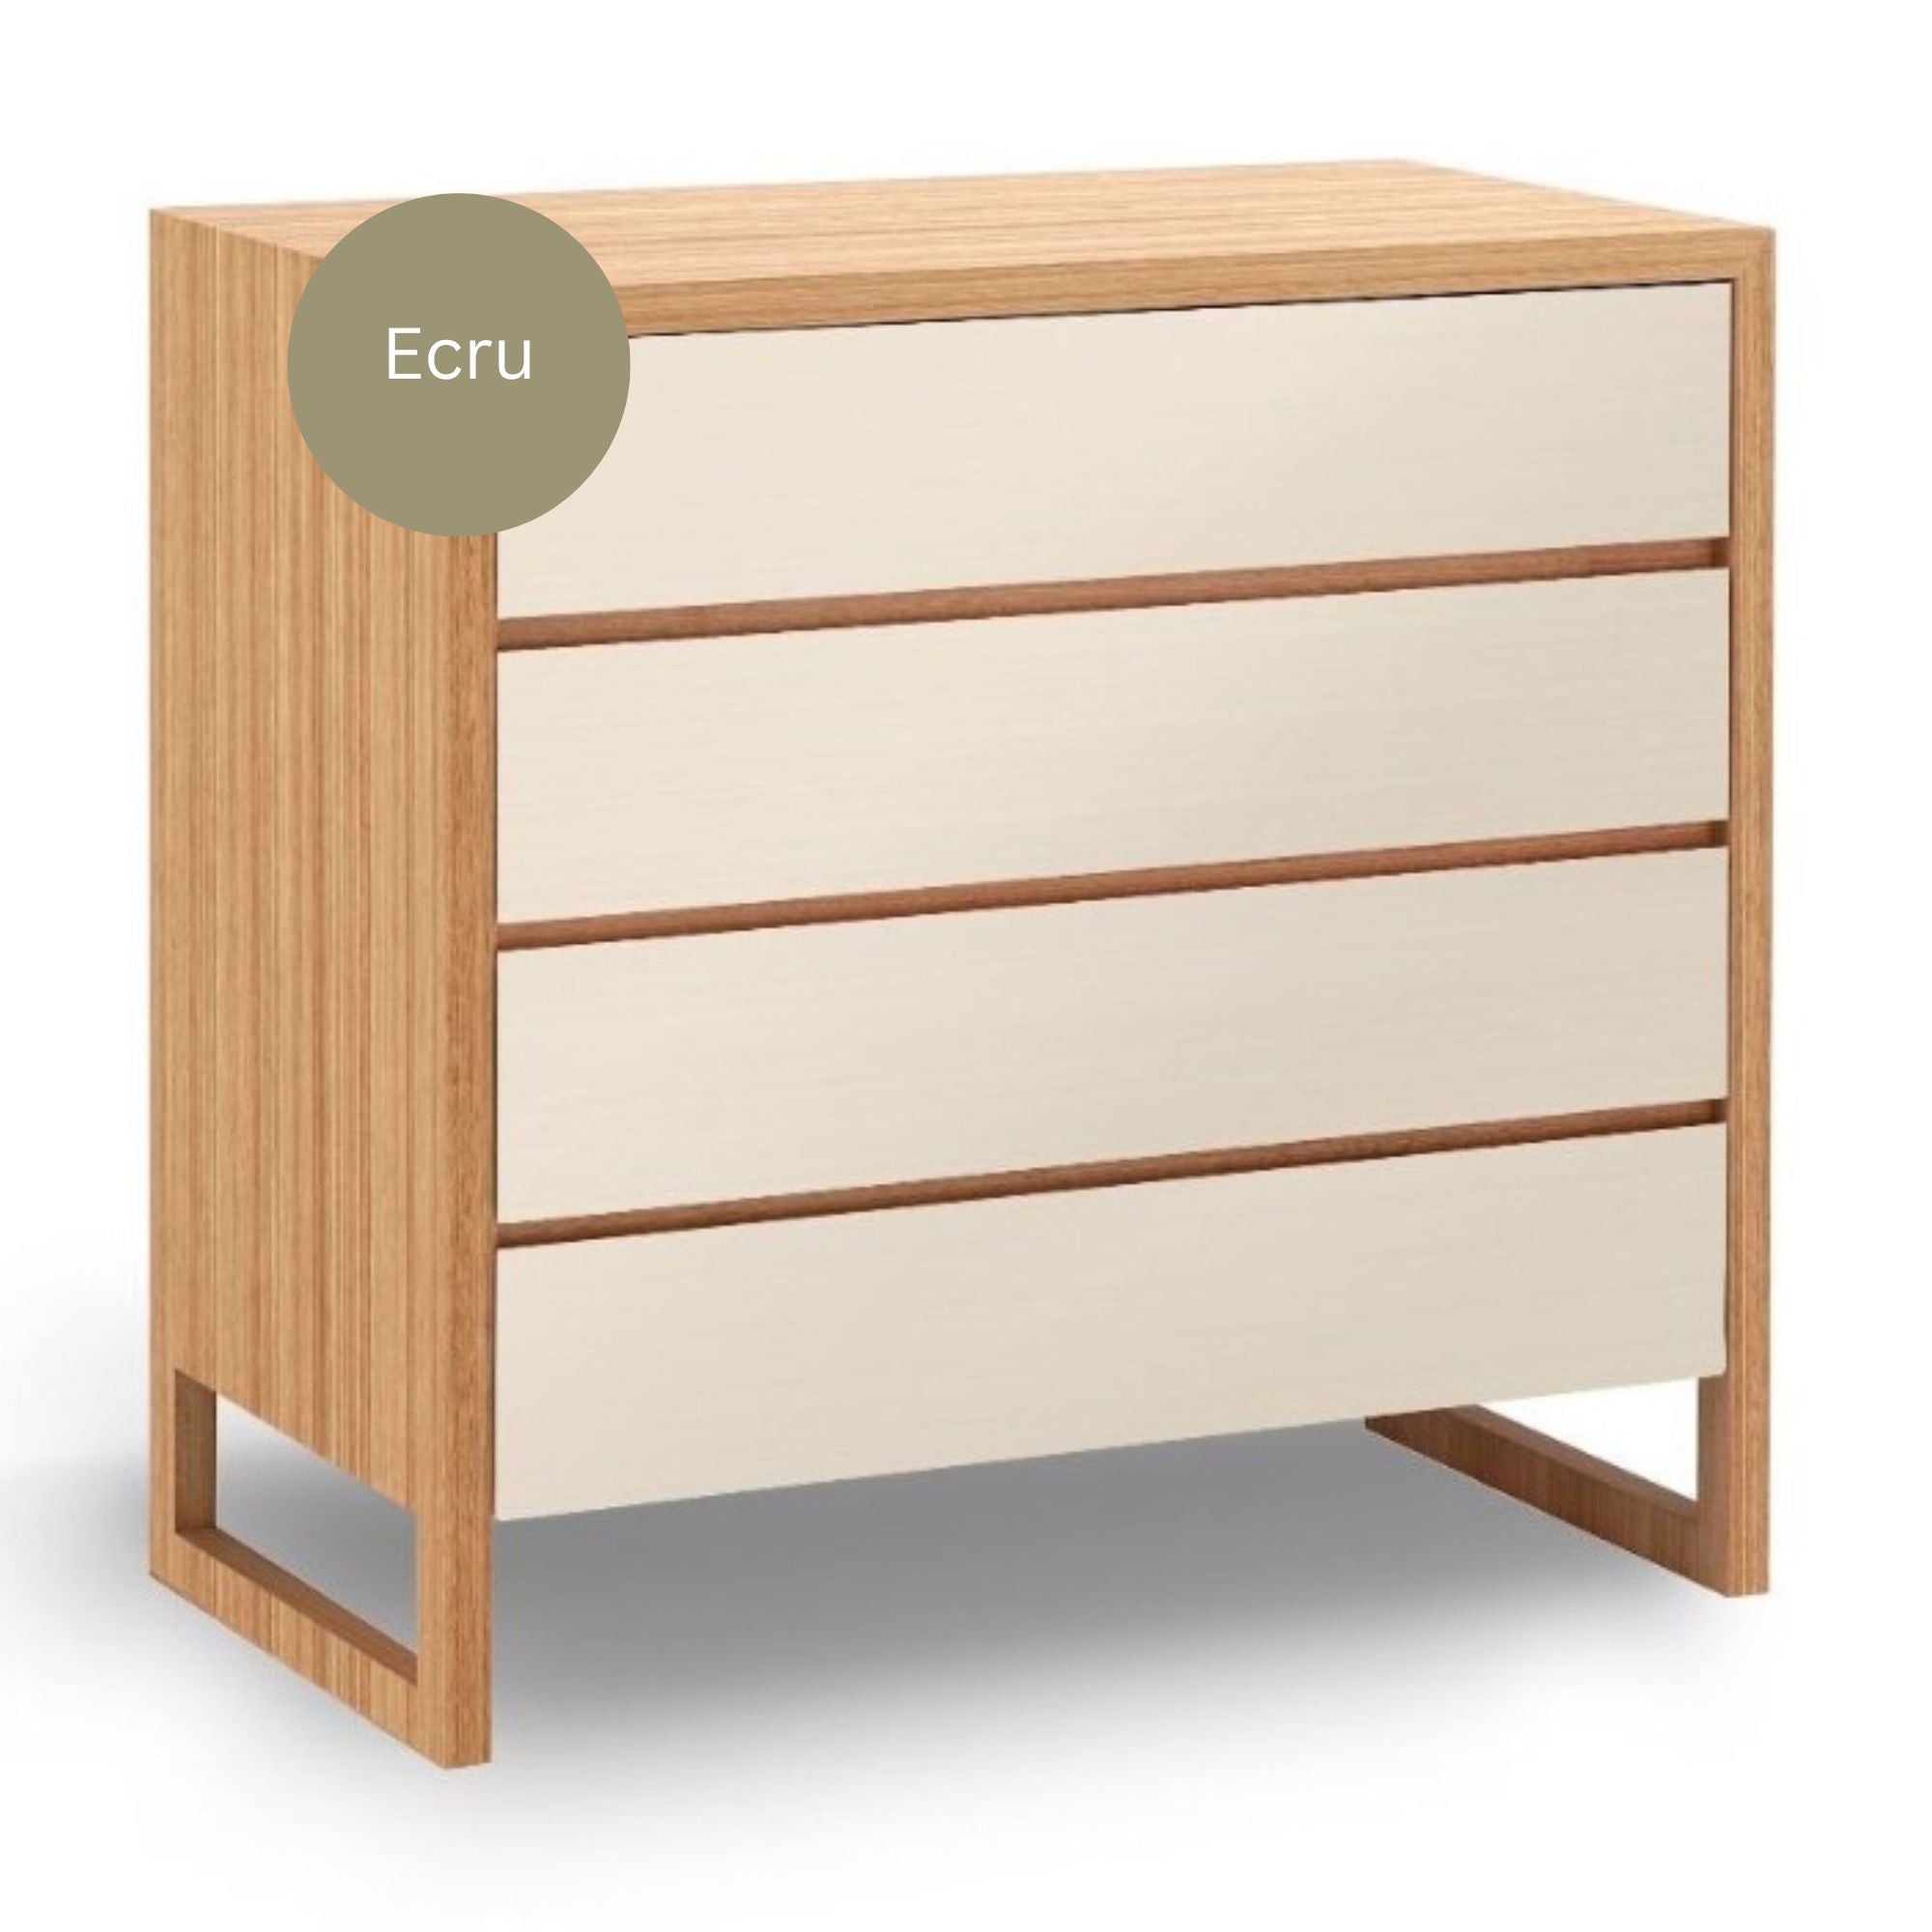 Colour Box kids chest of drawer featuring our new Ecru drawers.